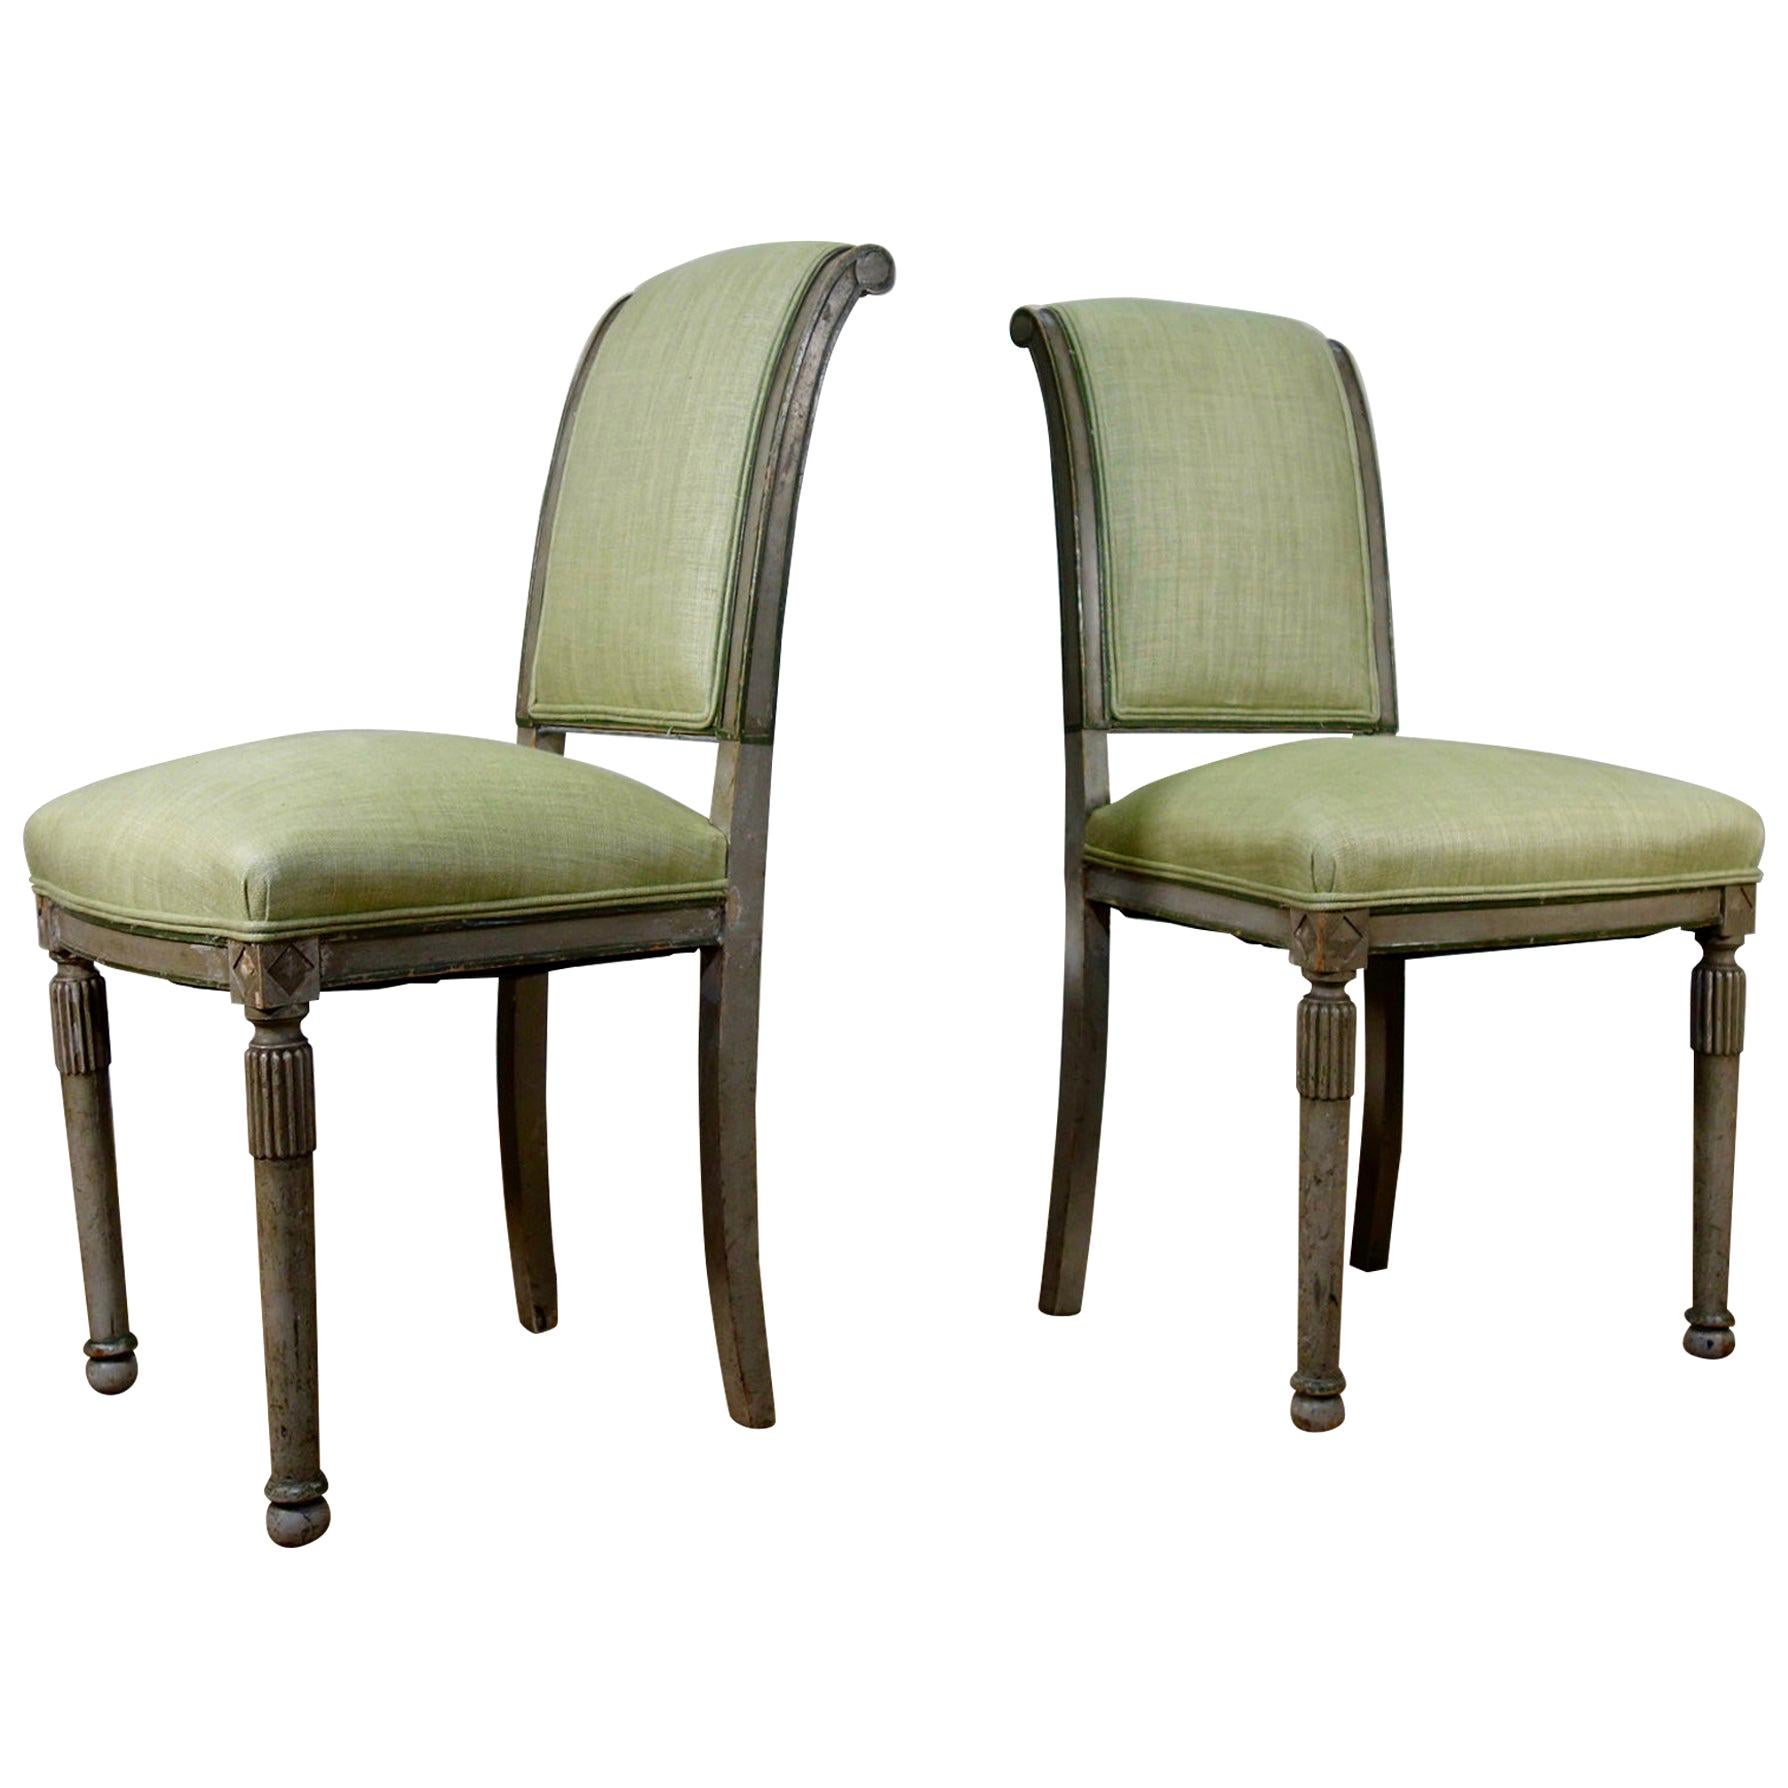 Pair of French 19th Century Original Painted Louis XVI Style Side Chairs